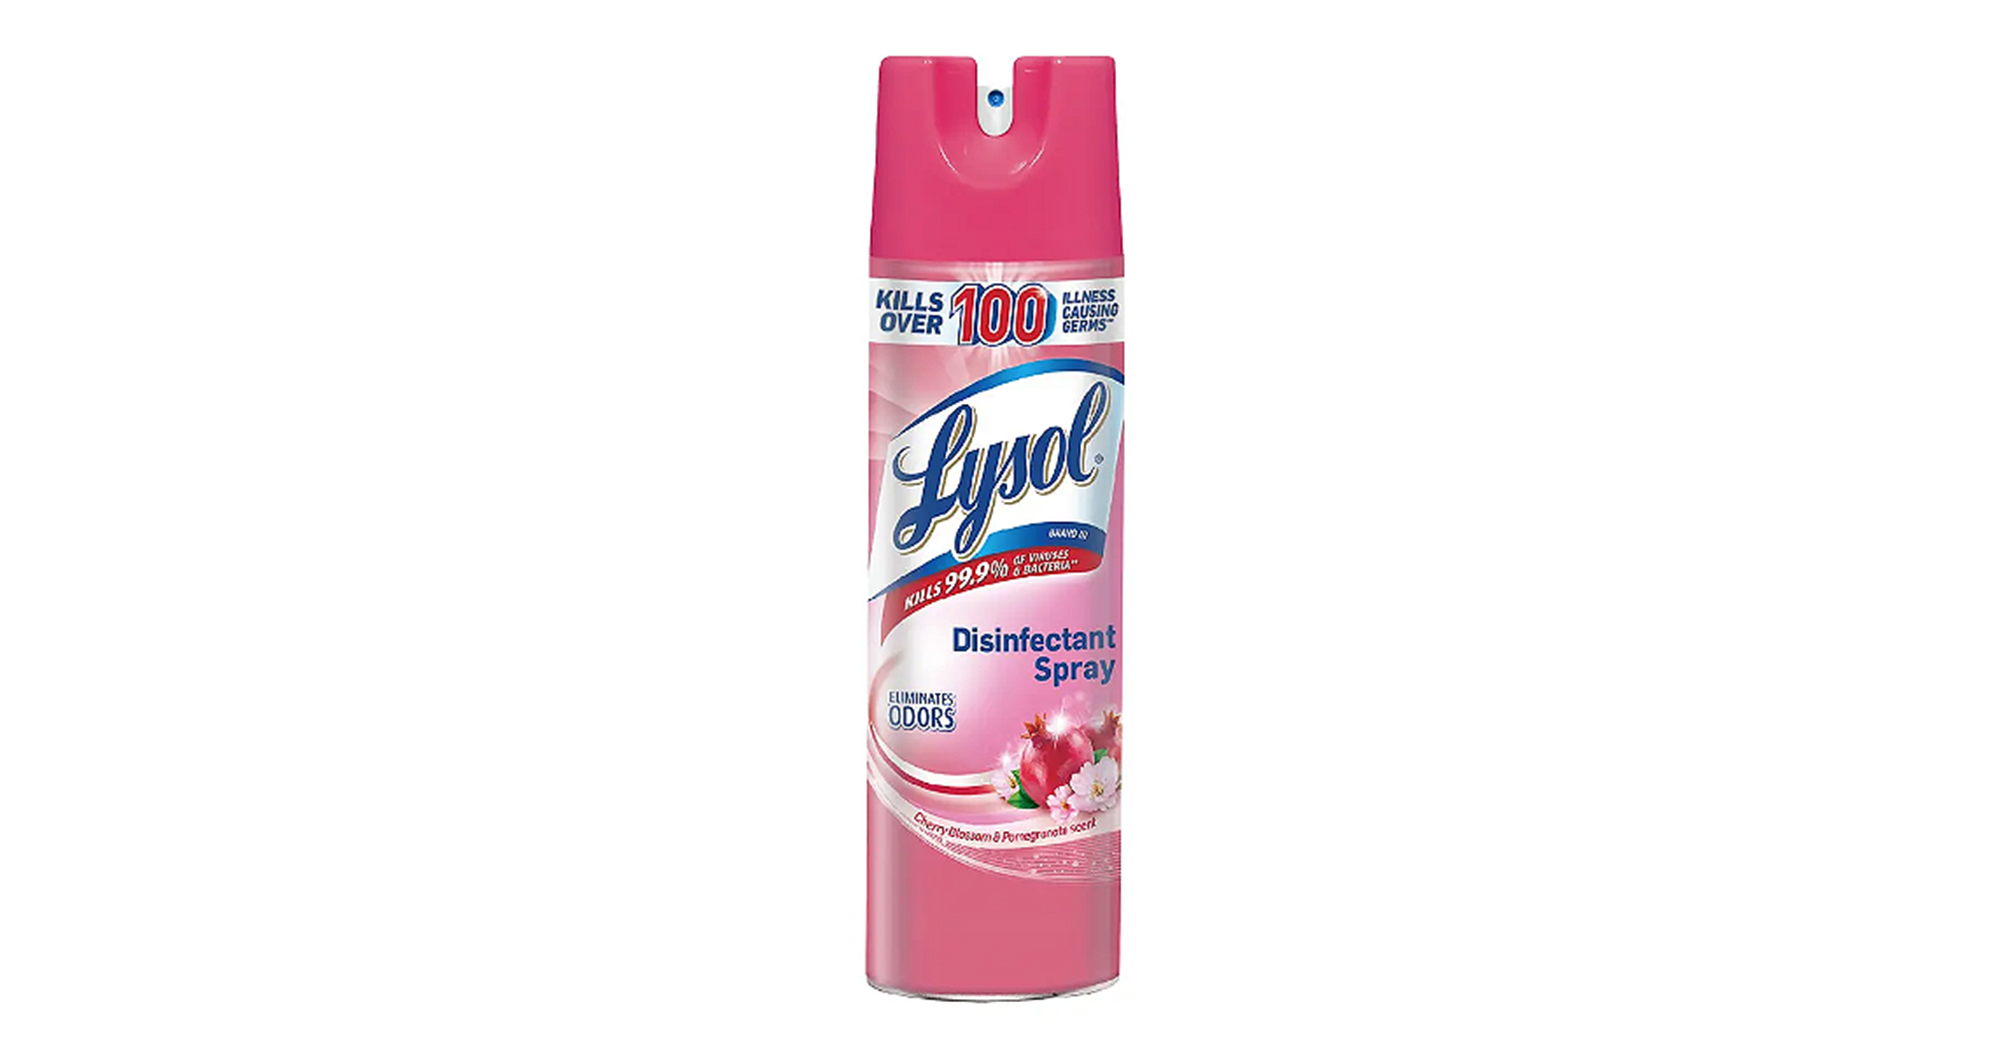 can you spray a mattress with lysol